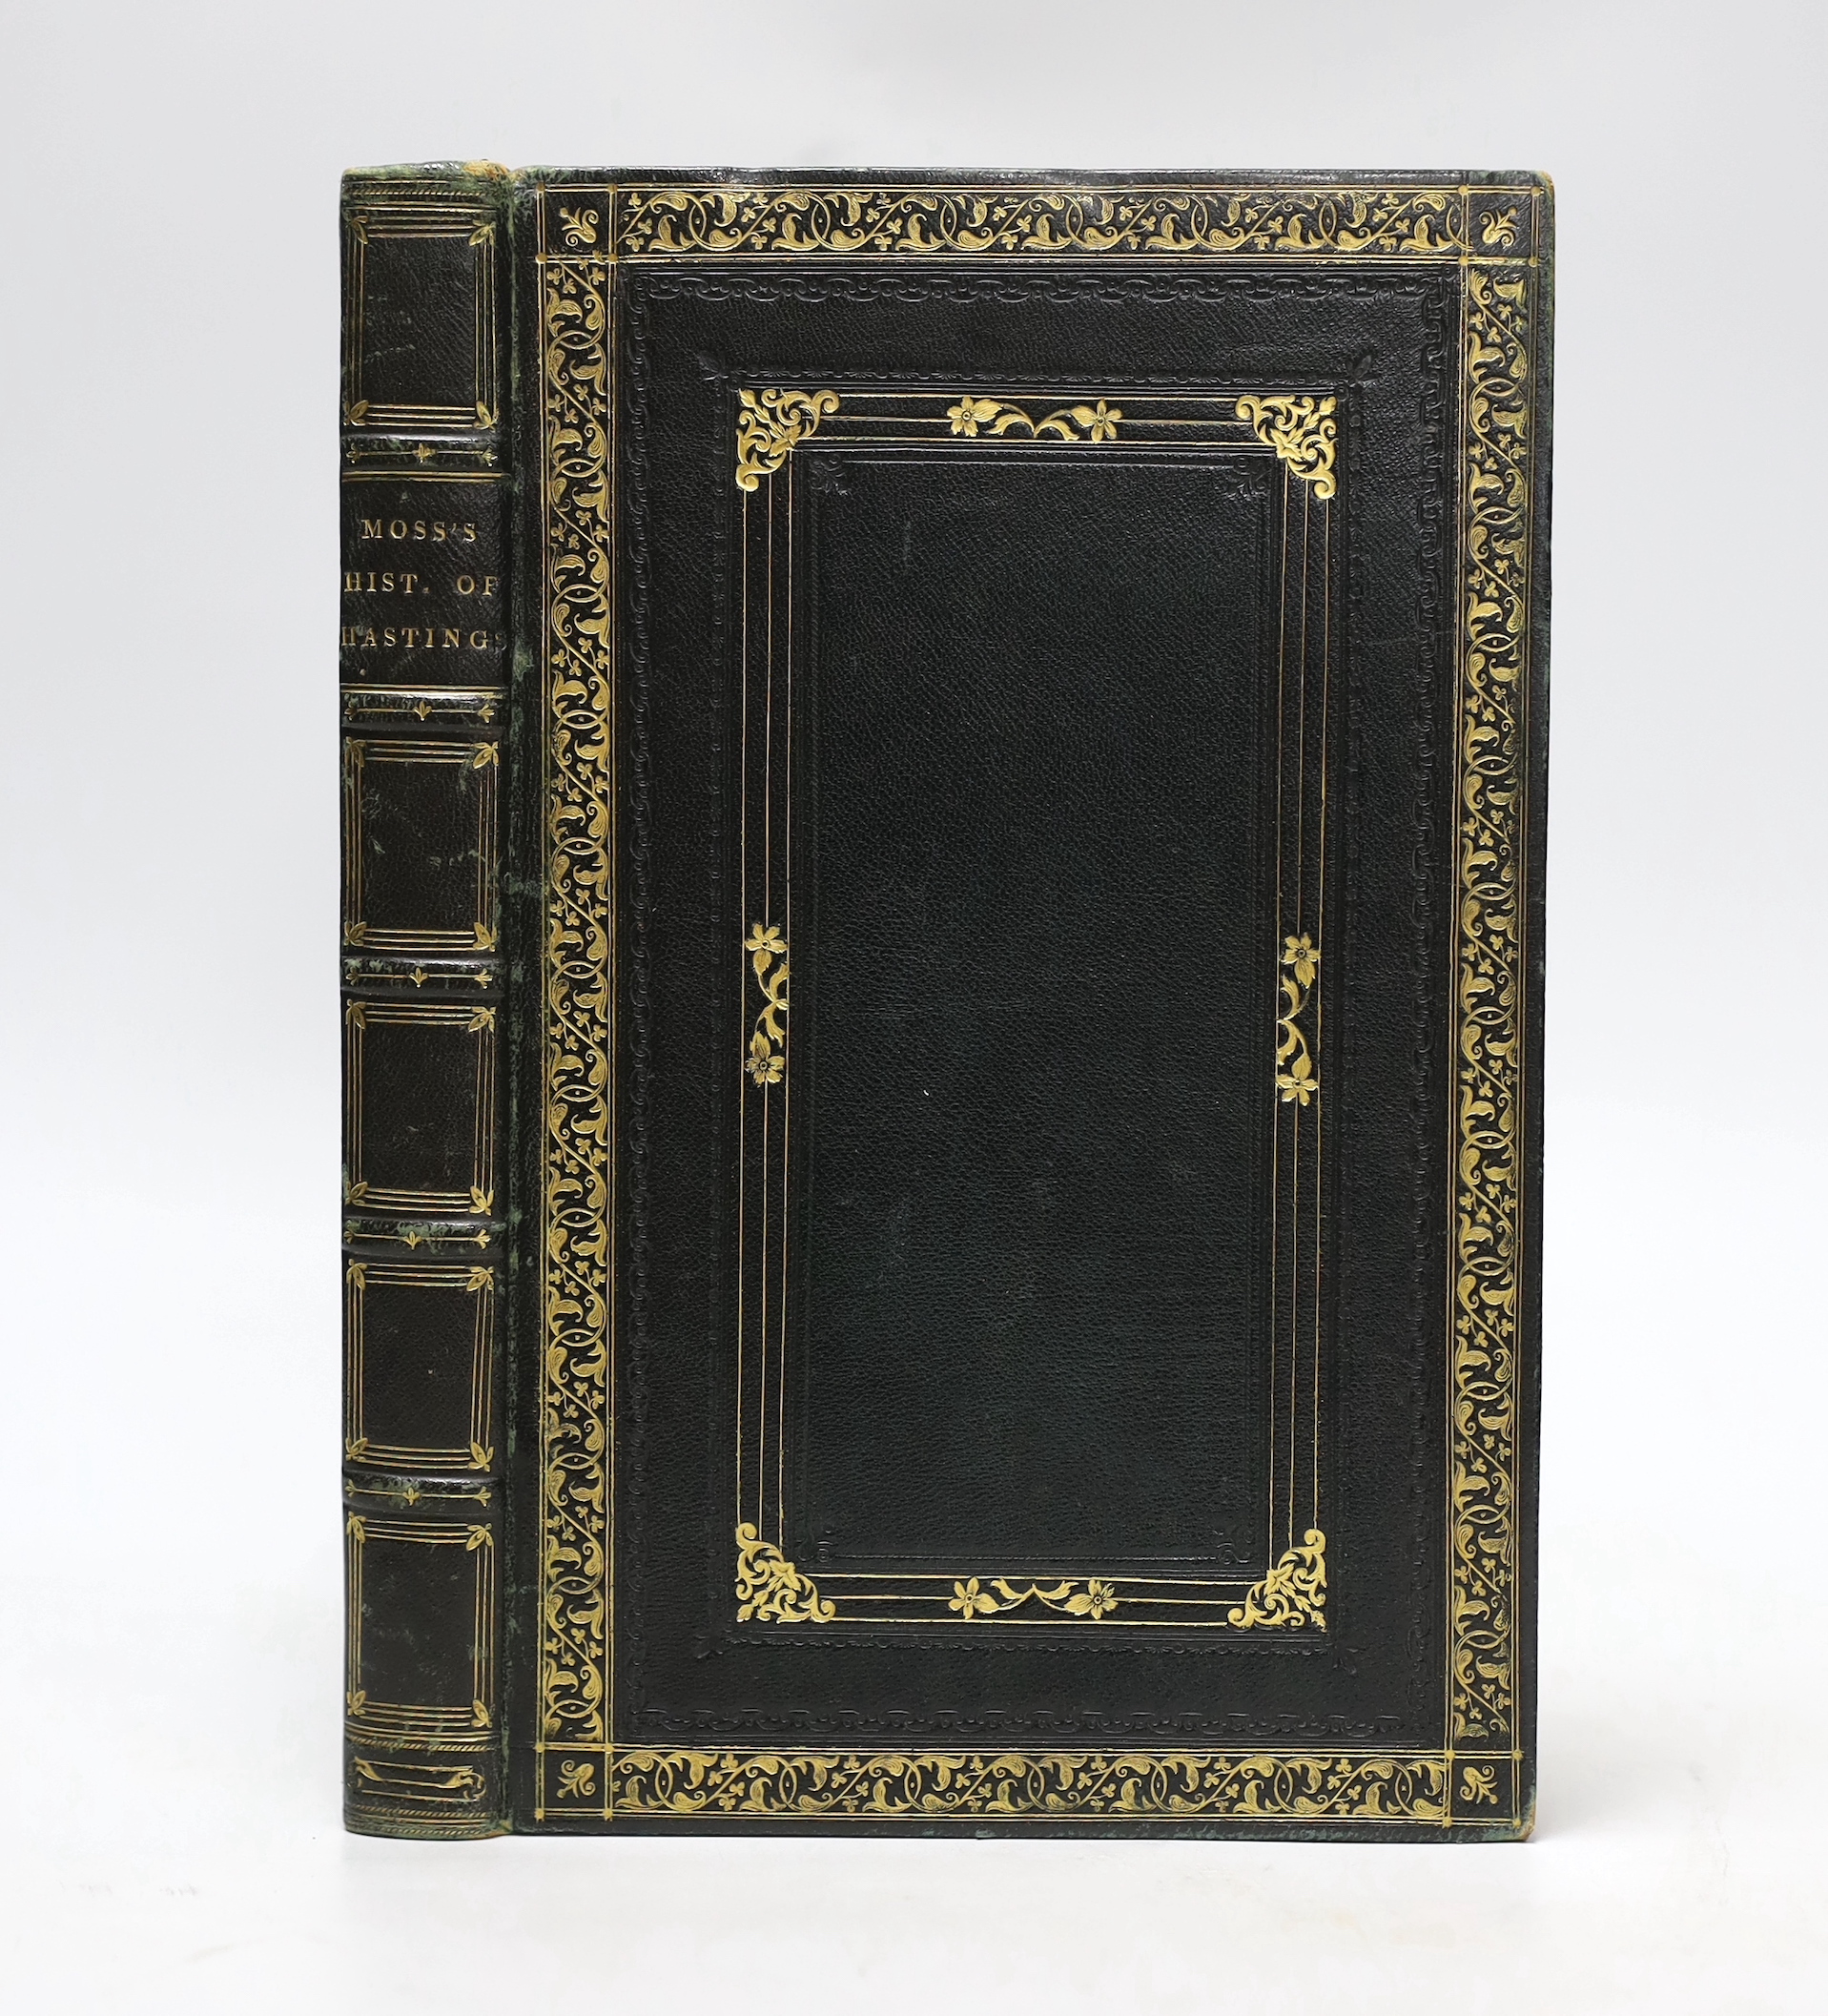 HASTINGS - Moss, W.G - The History and Antiquities of the Town and Port of Hastings, 8vo, black blind stamped morocco gilt, with 20 engraved plates, including a folding map and 1 extra illustration, a manuscript ‘’Extrac